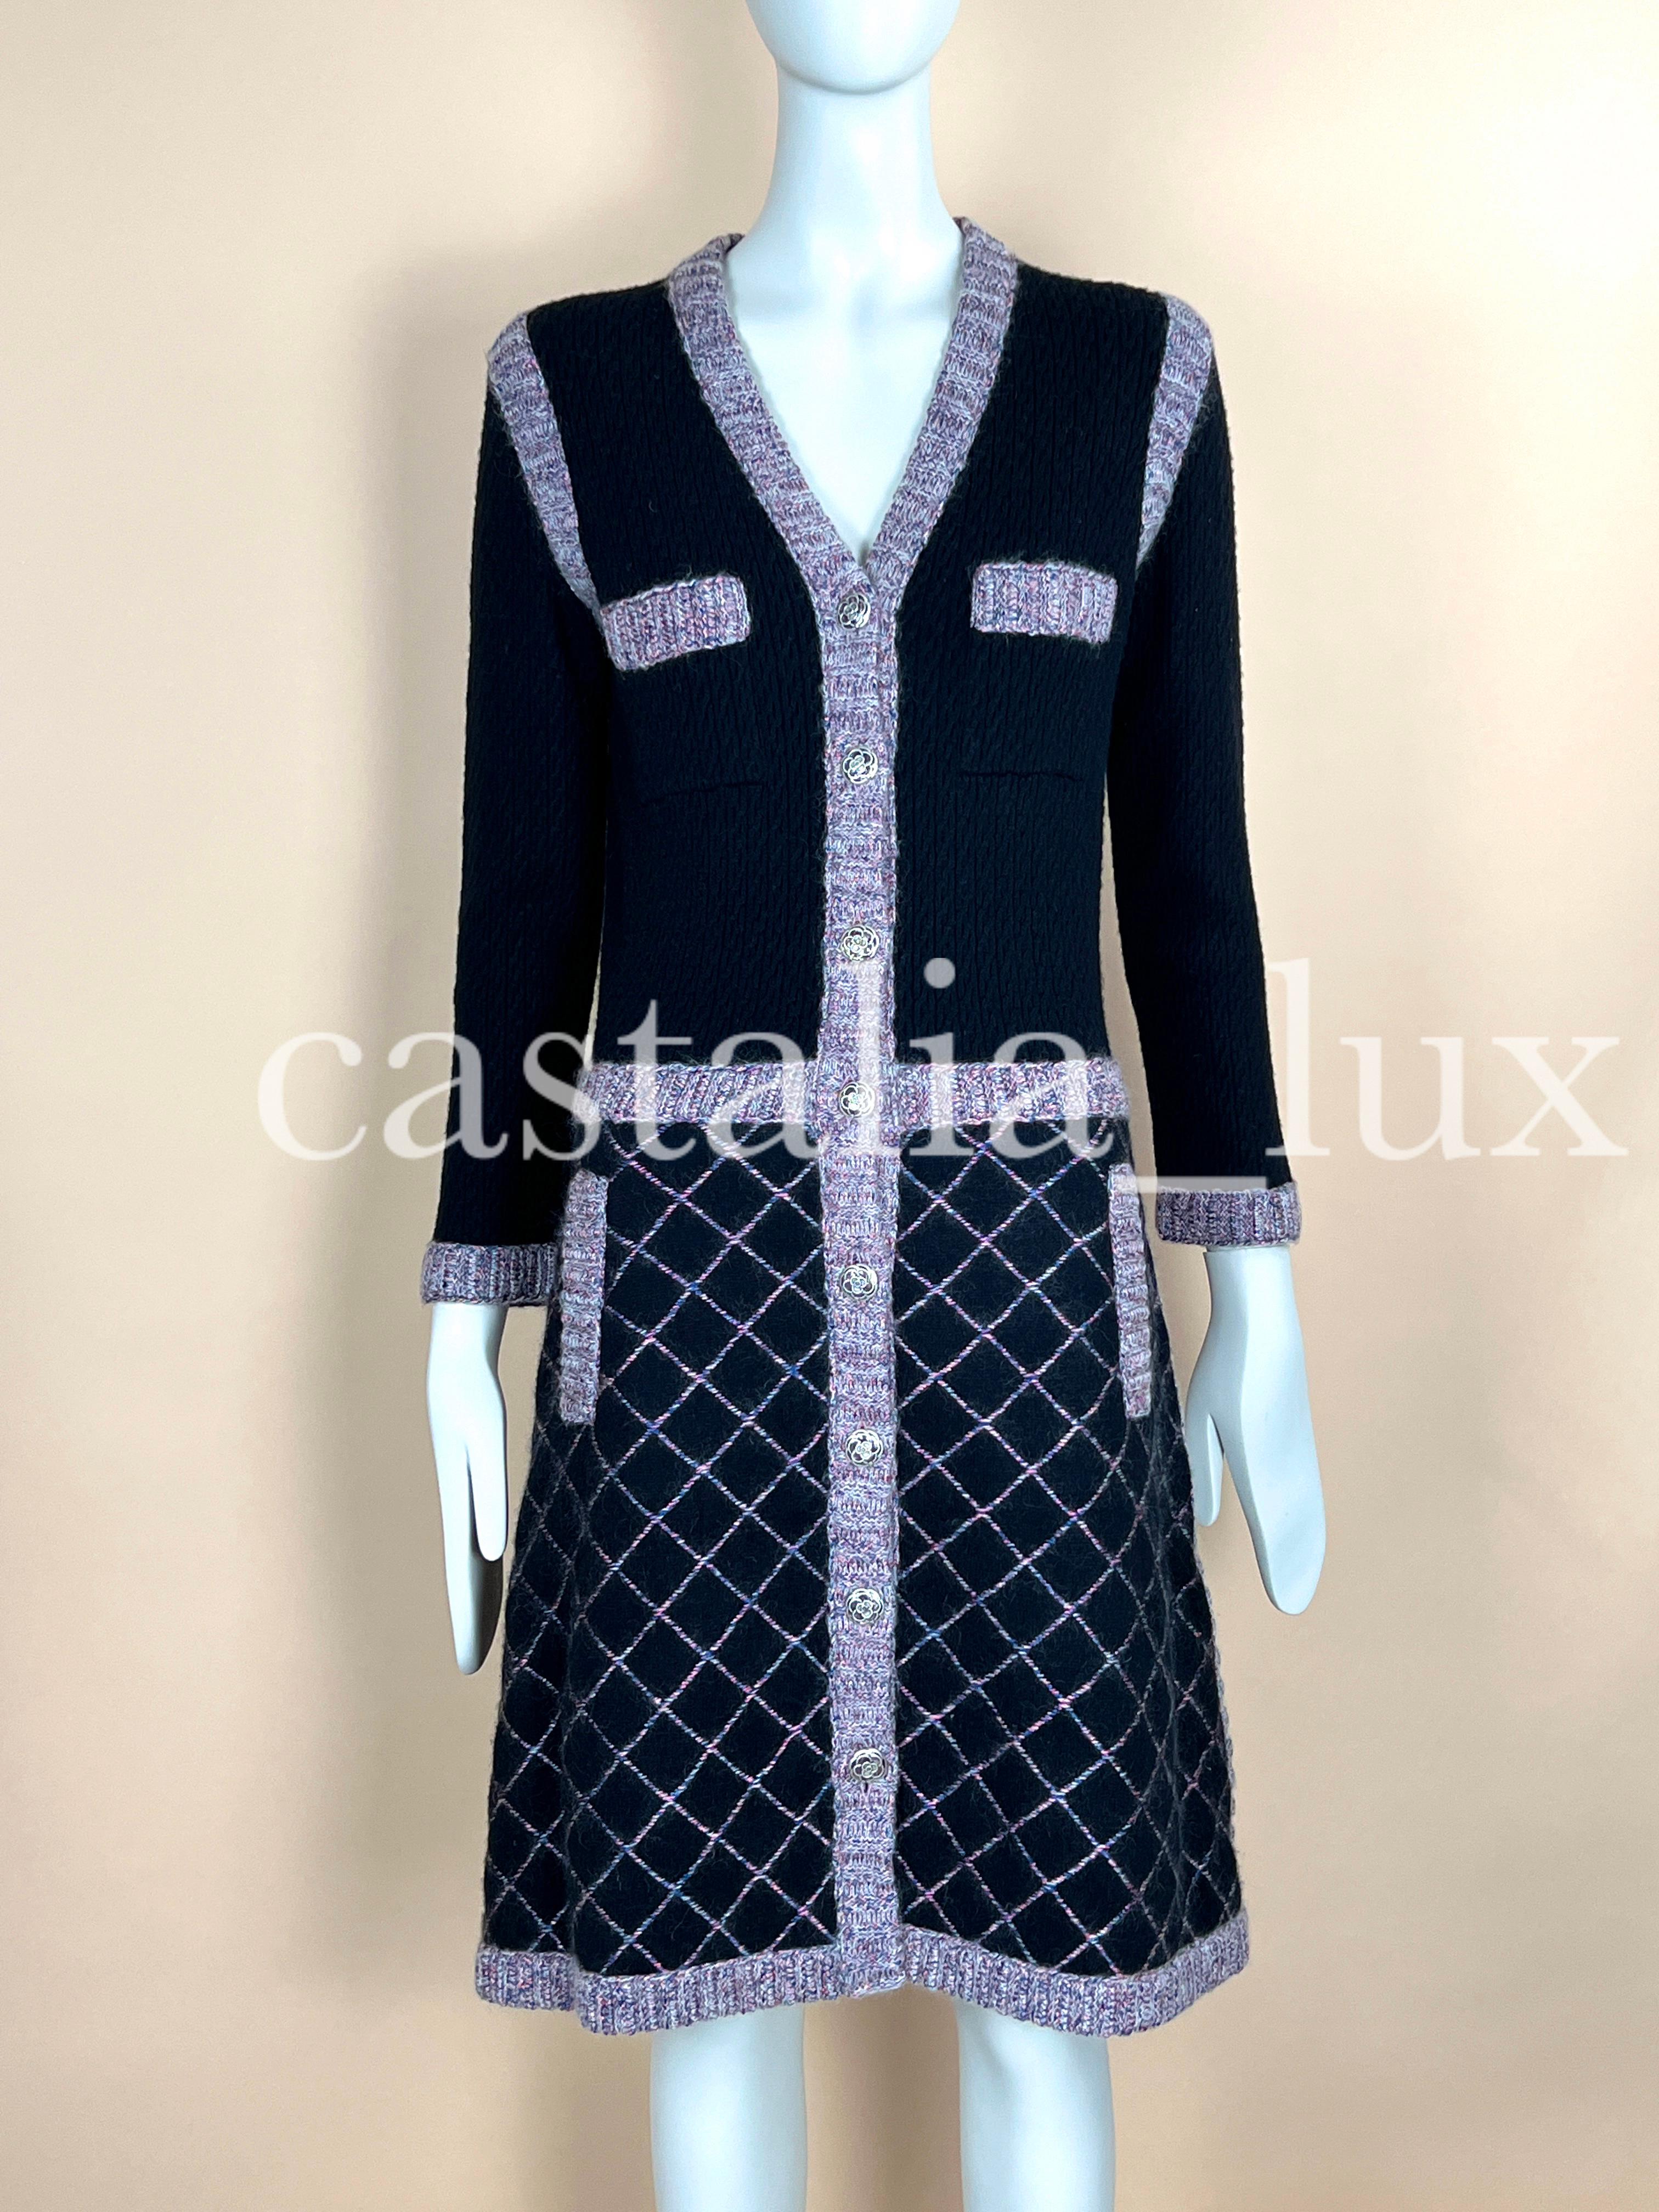 Chanel Coco Brasserie Ad Campaign Jacket Dress For Sale 3